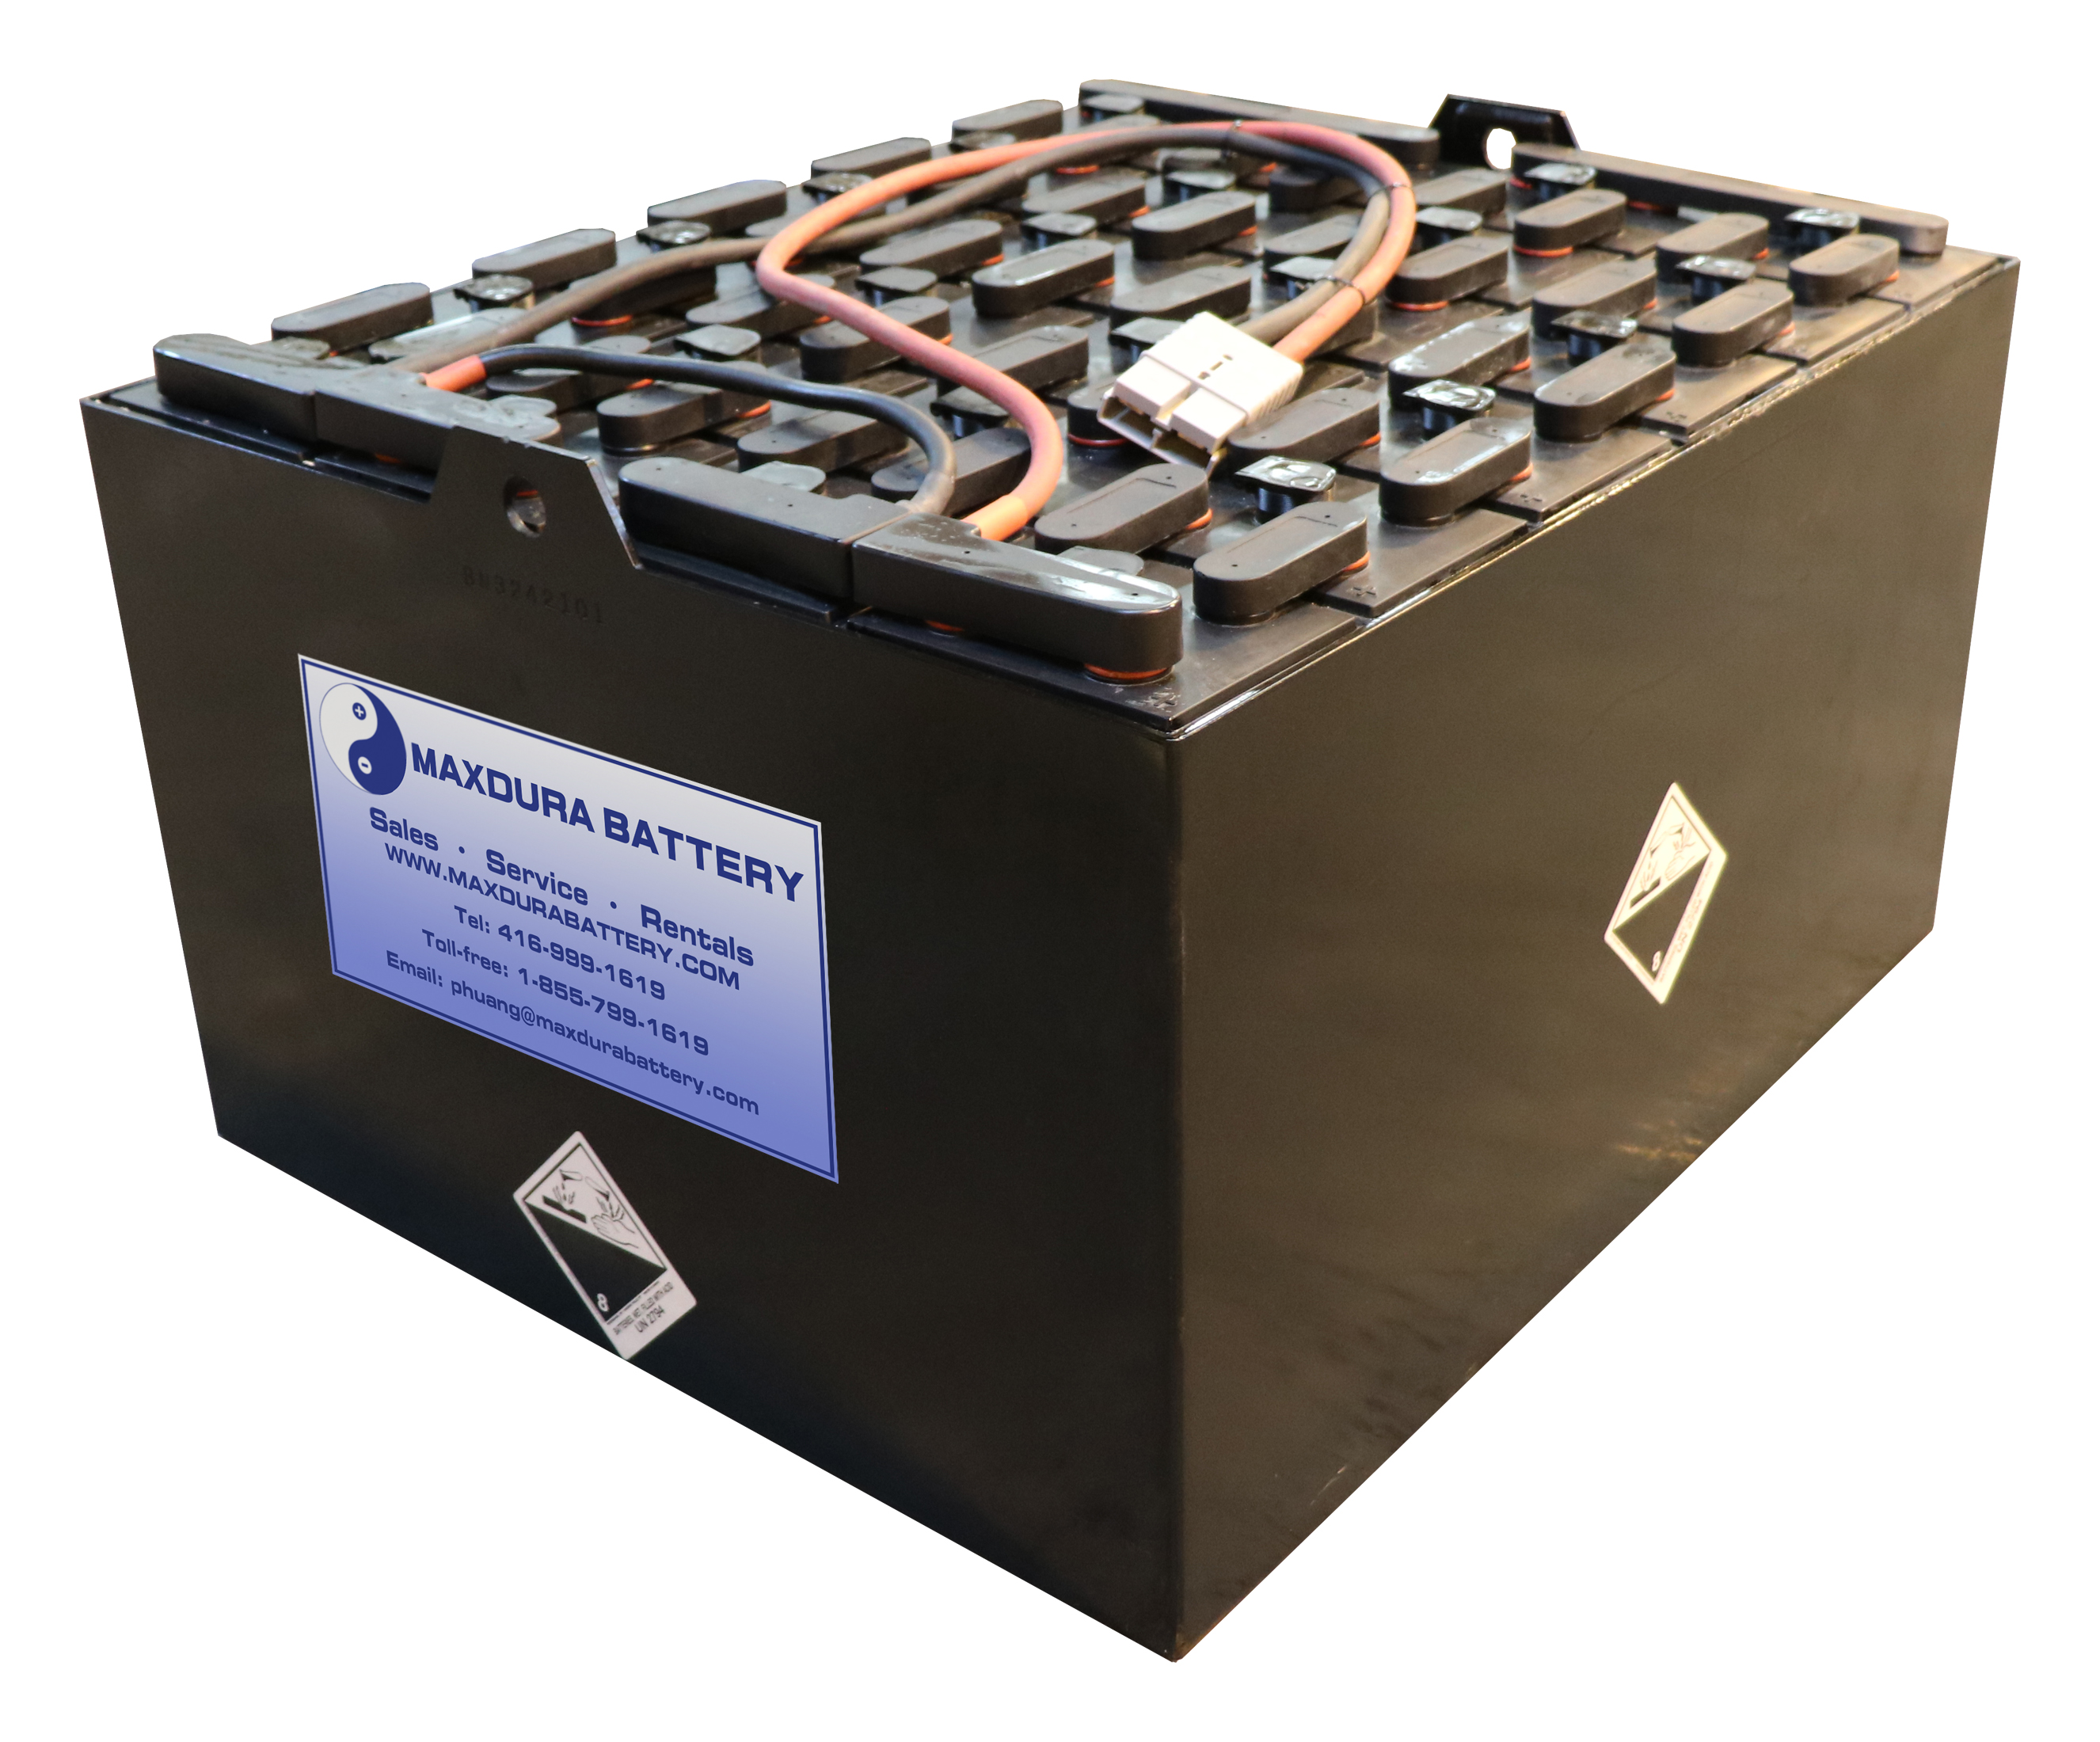 Refurbished Forklift Battery Over 50 Models On Choice Maxdura Battery